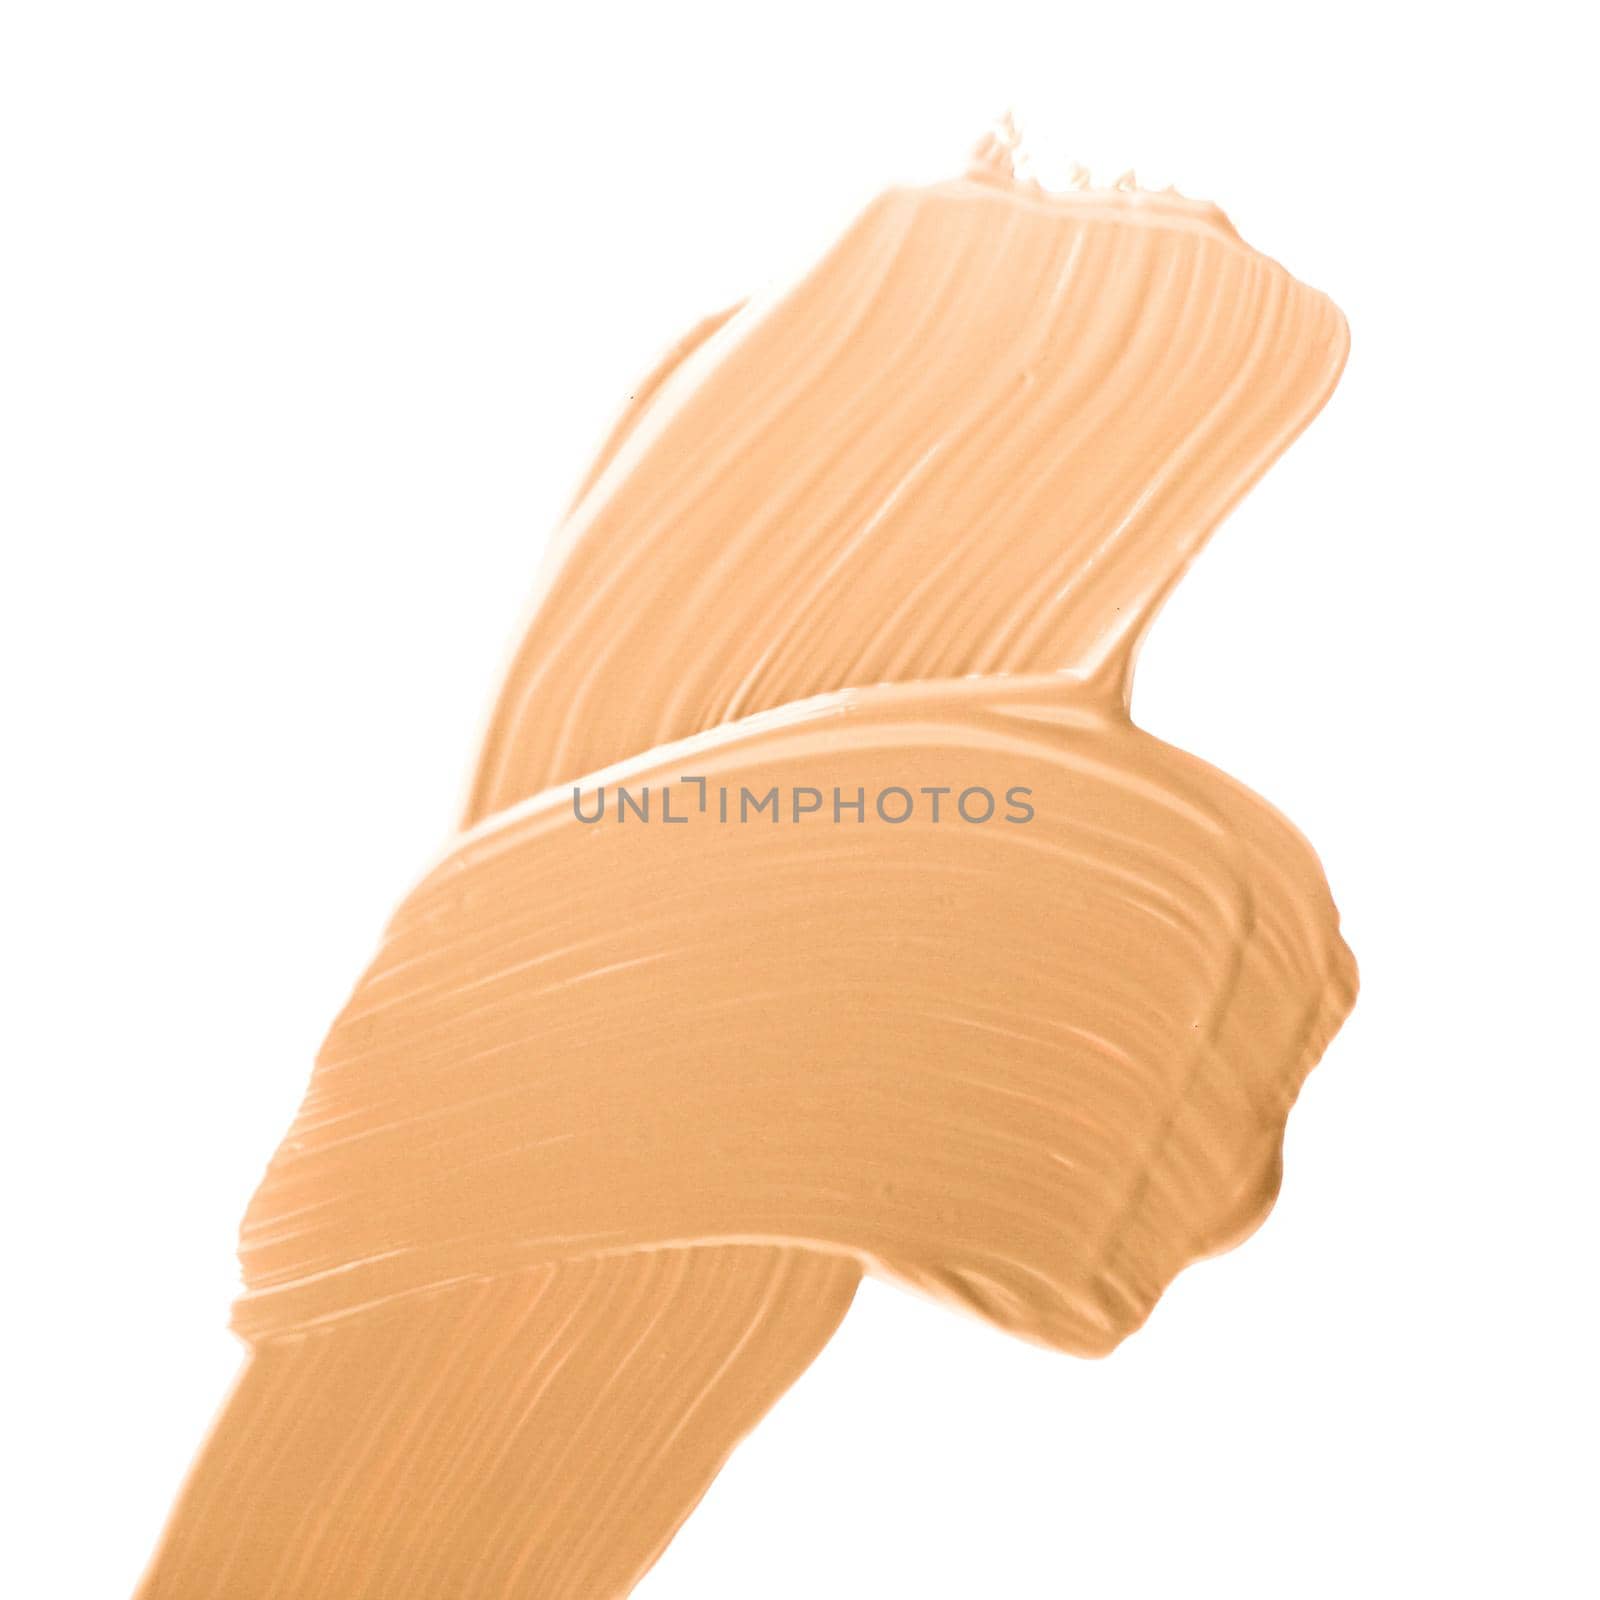 Make-up base foundation brush stroke isolated on white background, flatlay - cosmetic products, beauty texture background concept. Beige is always a good idea